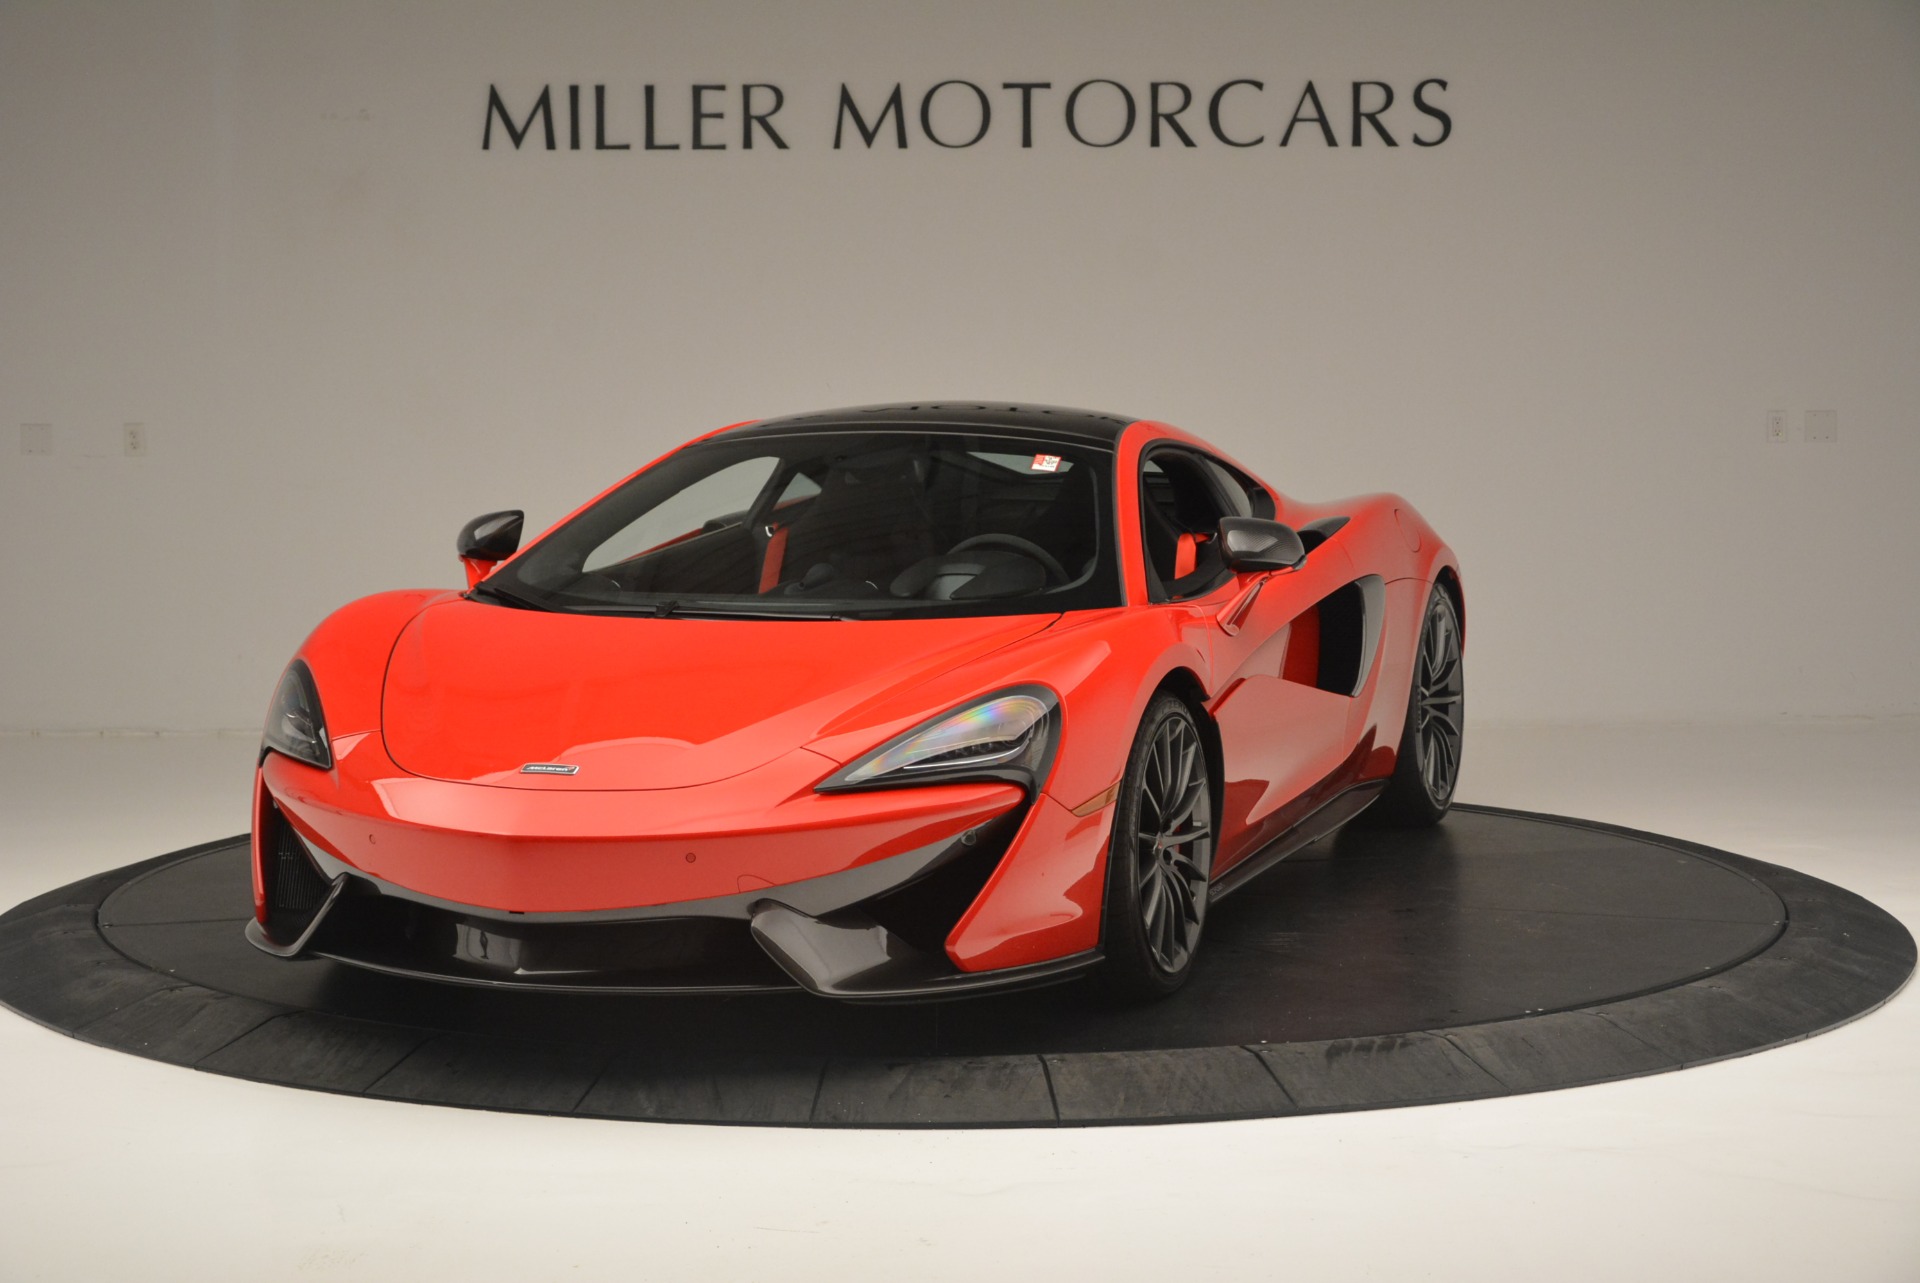 Used 2018 McLaren 570GT for sale Sold at Maserati of Greenwich in Greenwich CT 06830 1